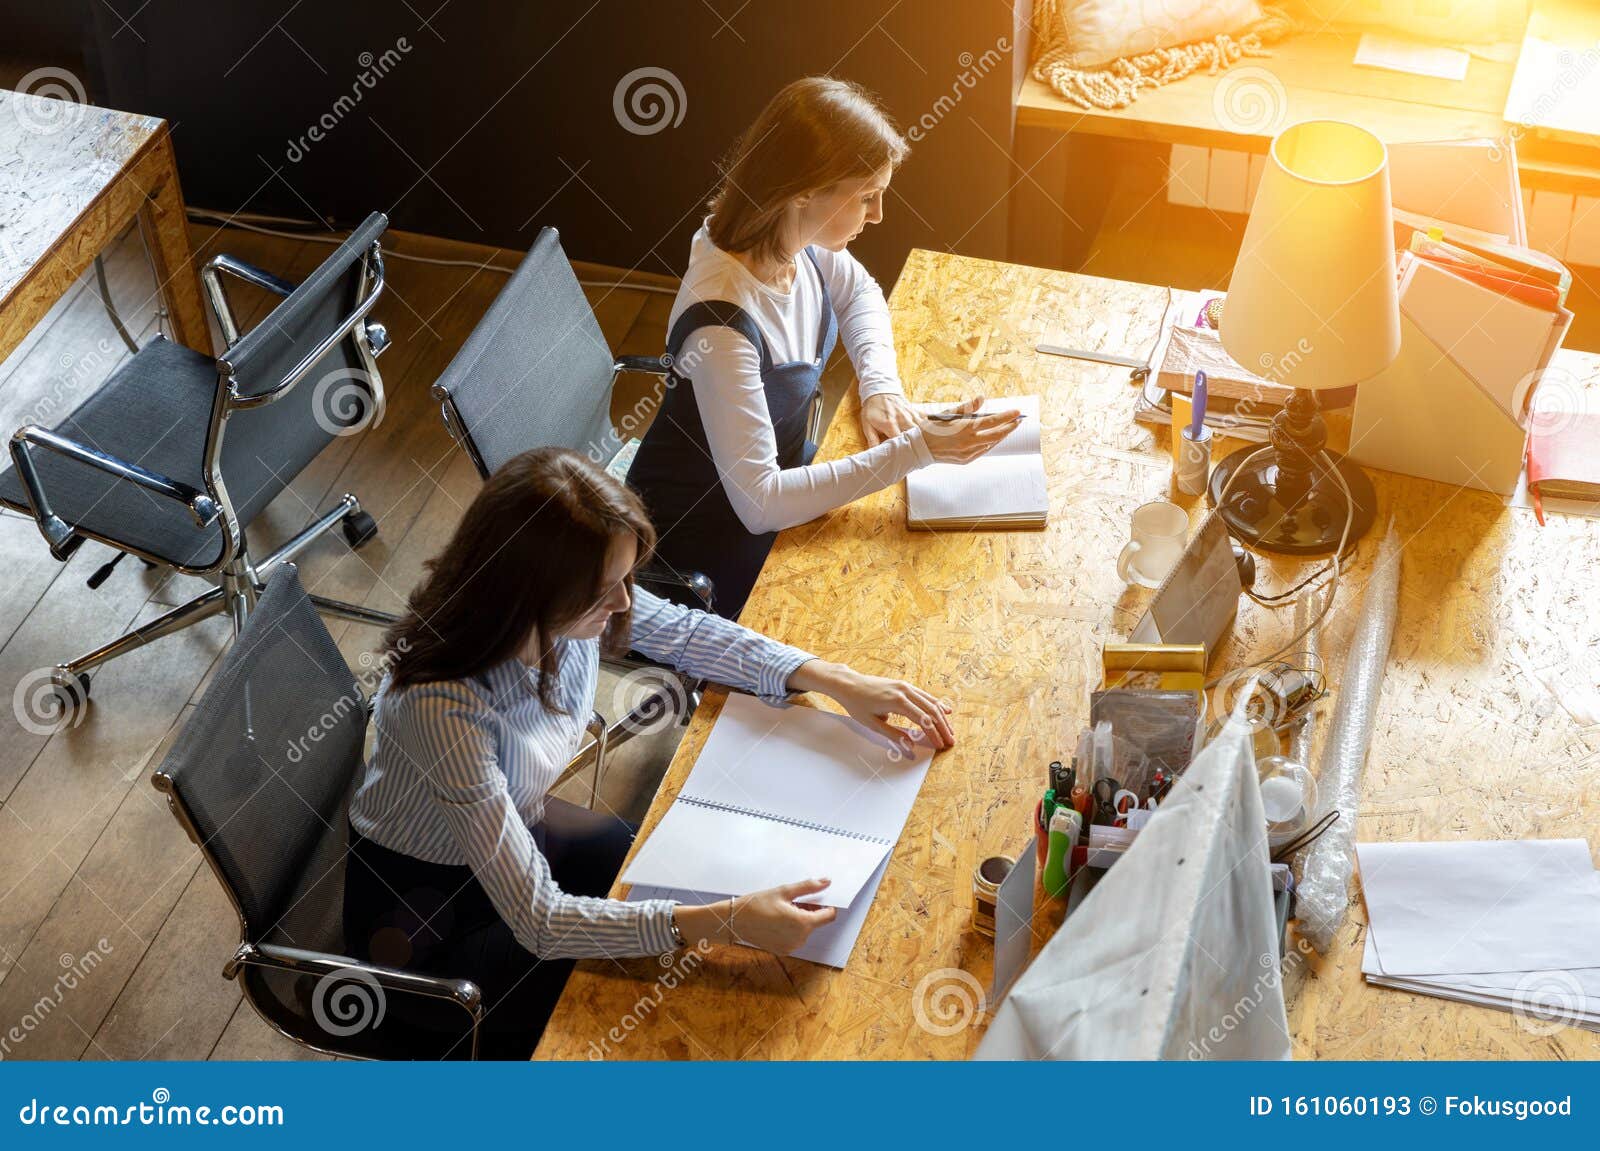 Two Girls Working In The Office At The Table Stock Image Image